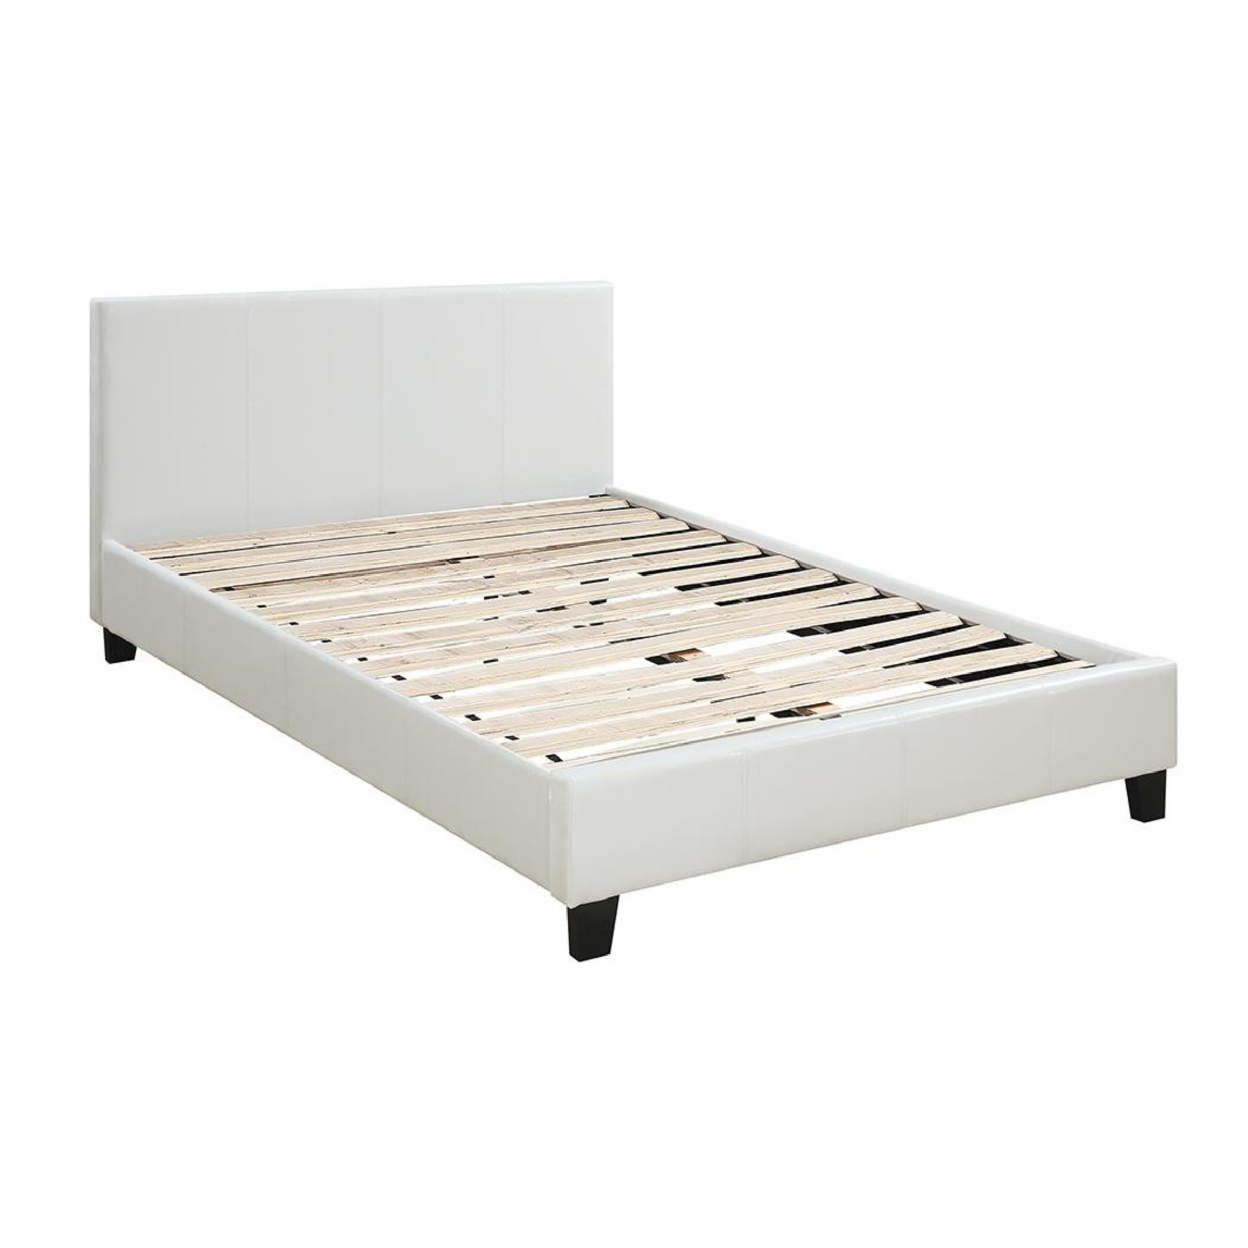 Transitional Style Leatherette Queen Bed With Padded Headboard, White- Saltoro Sherpi